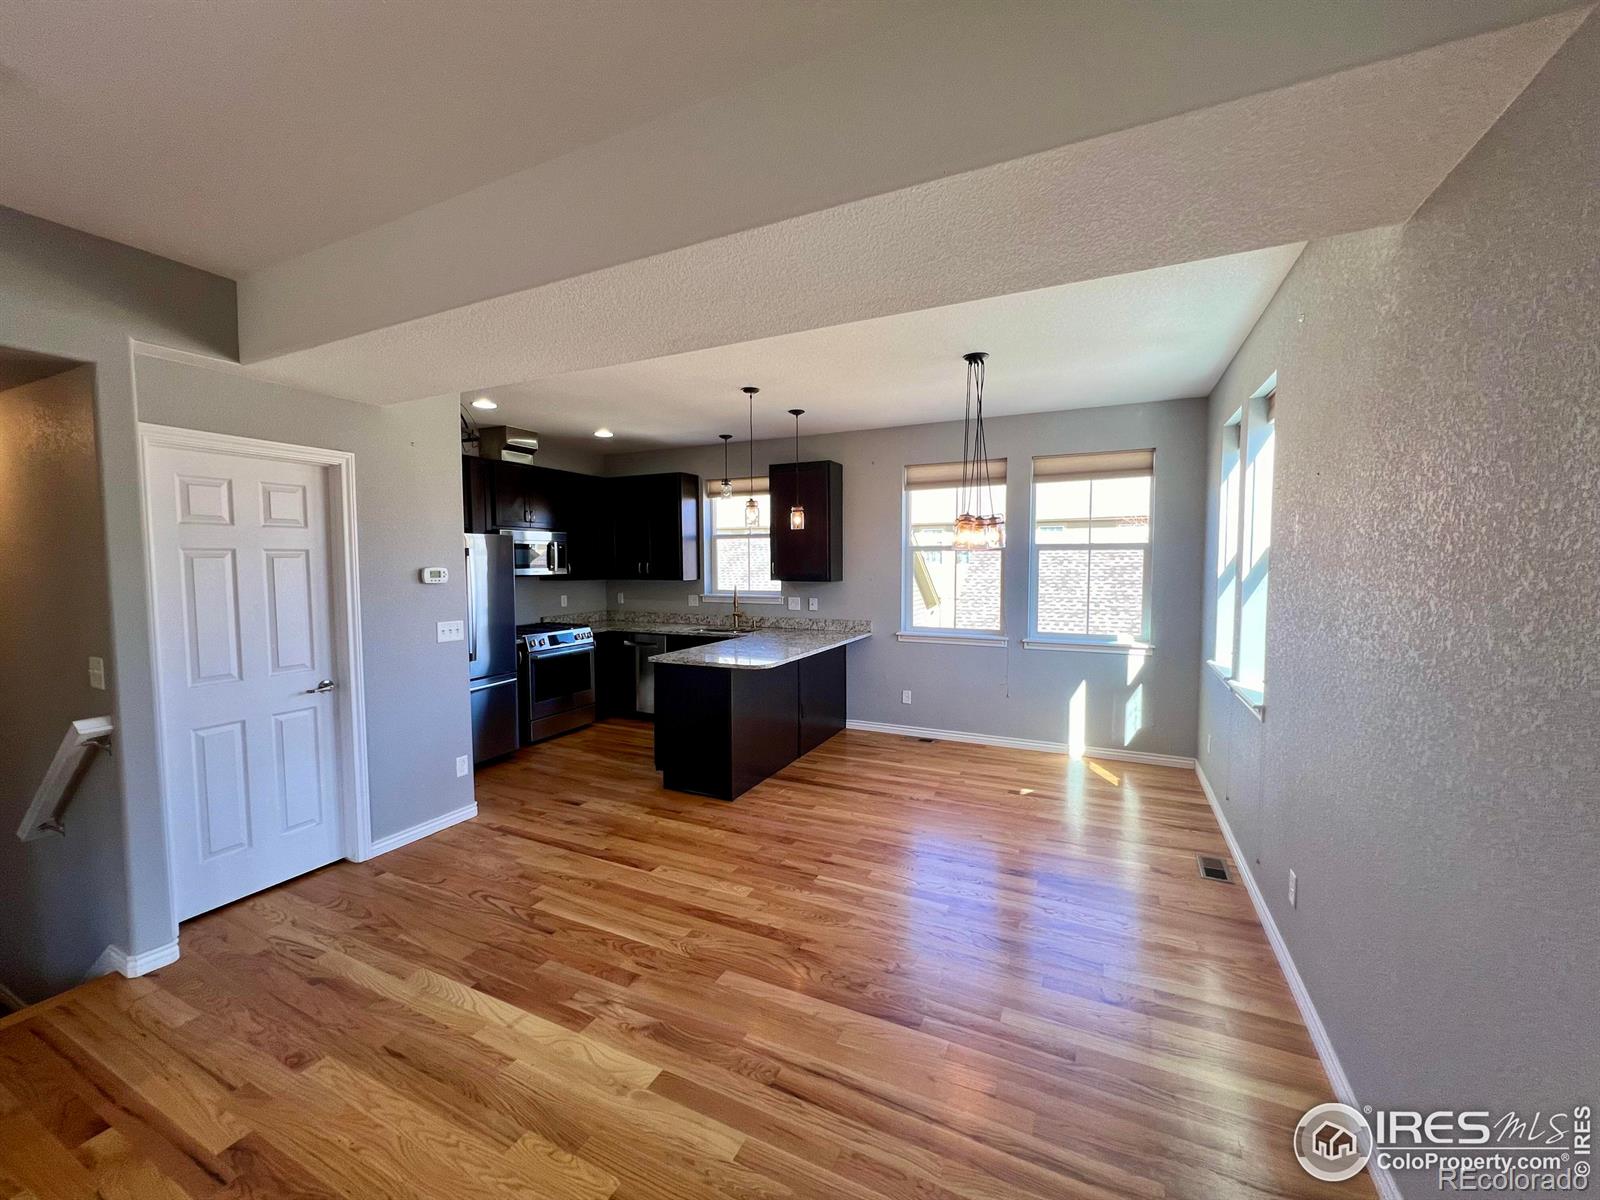 Report Image for 685  Rawlins Way,Lafayette, Colorado